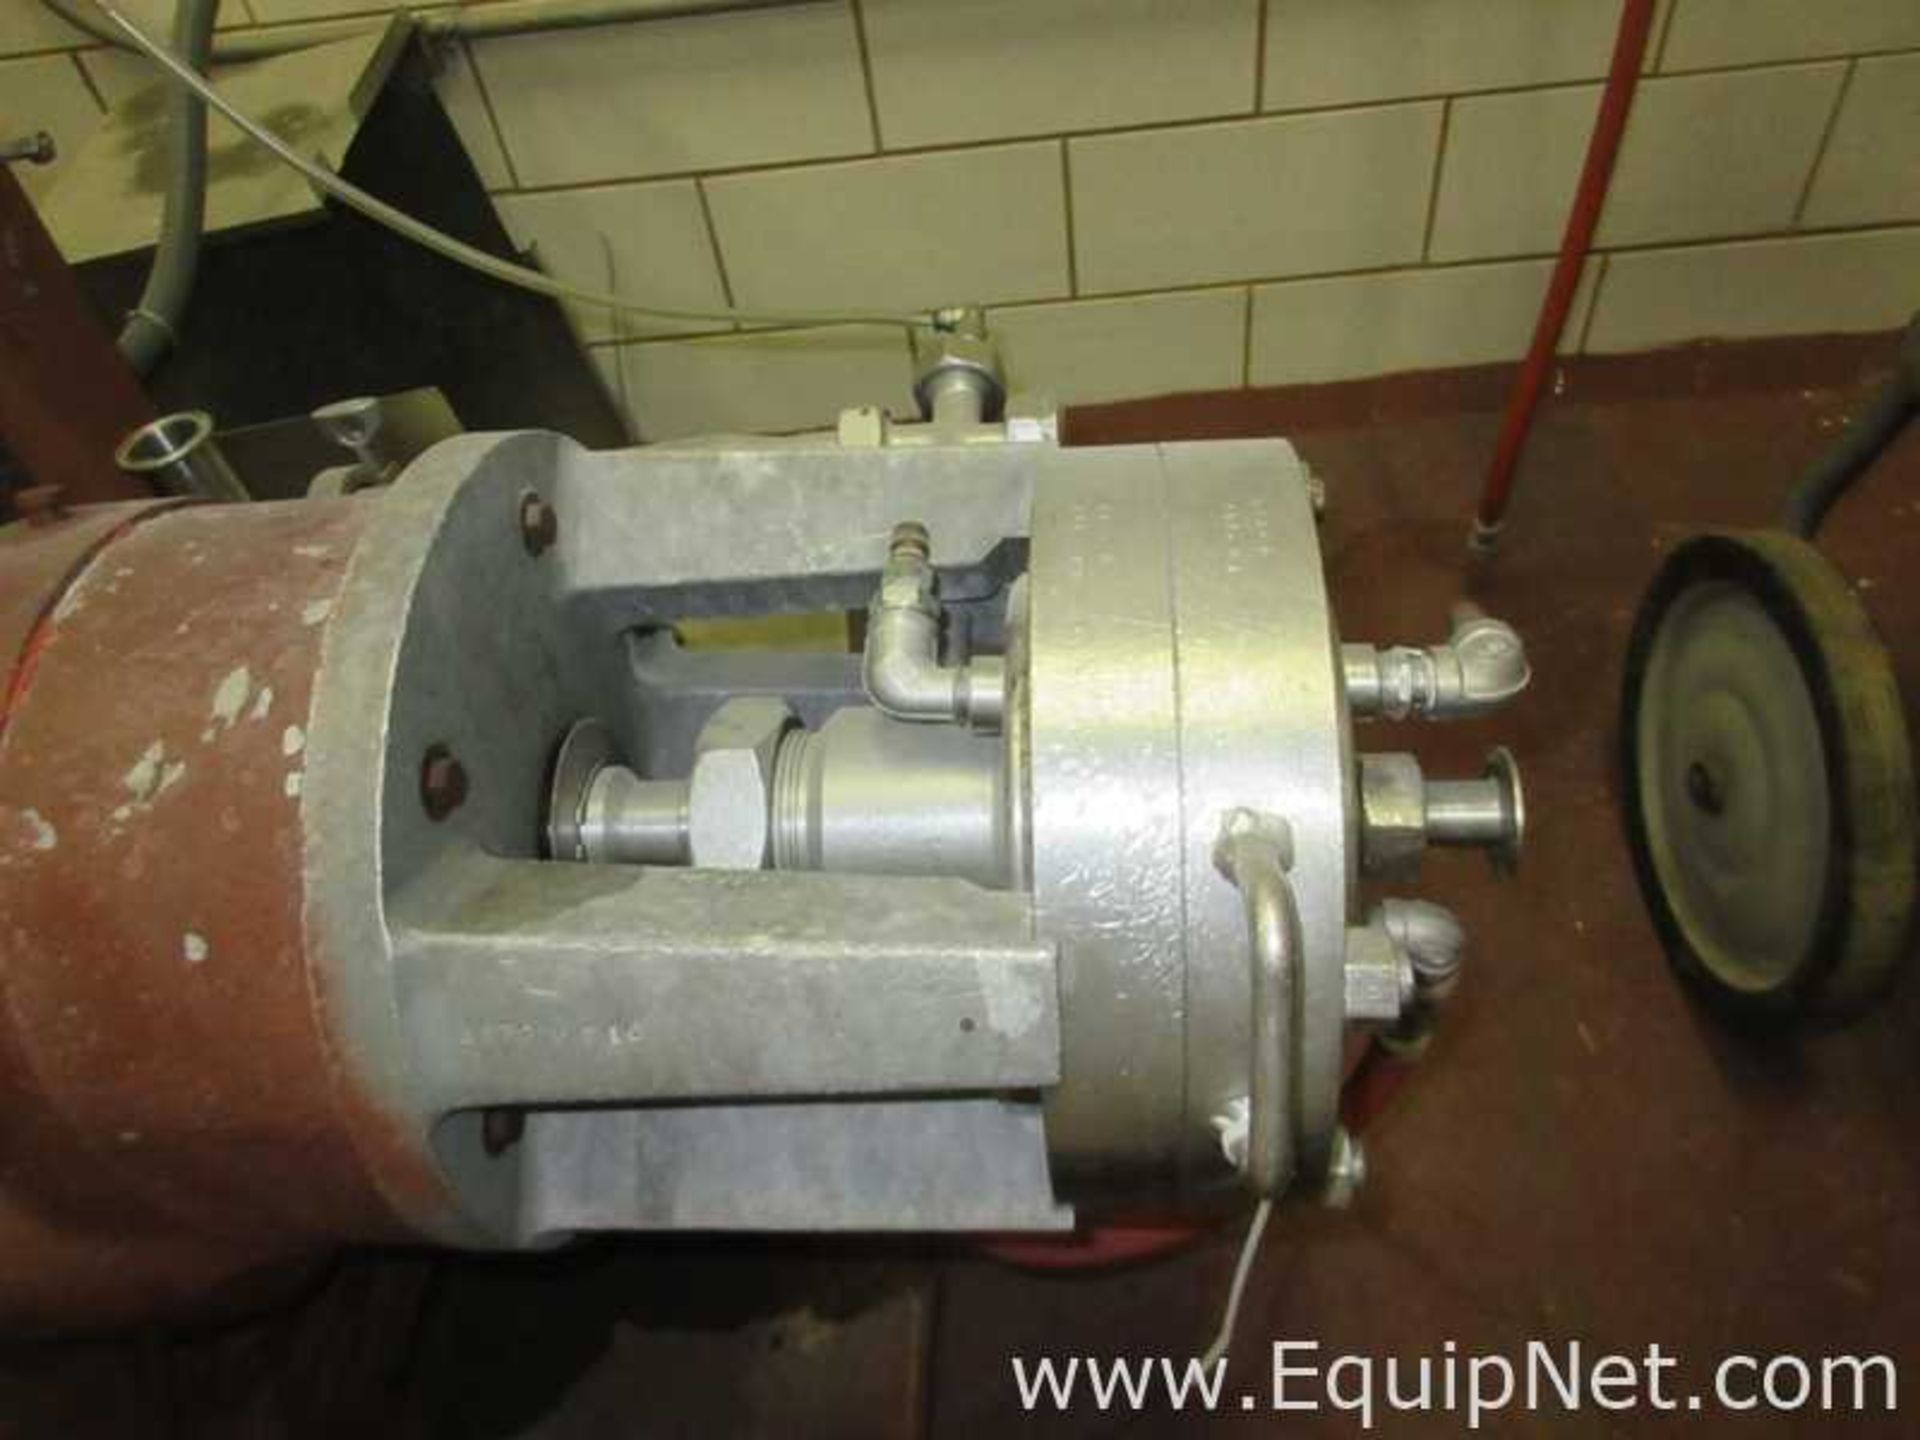 Whipper And Waukesha Positive Displacement Pump - Image 2 of 12